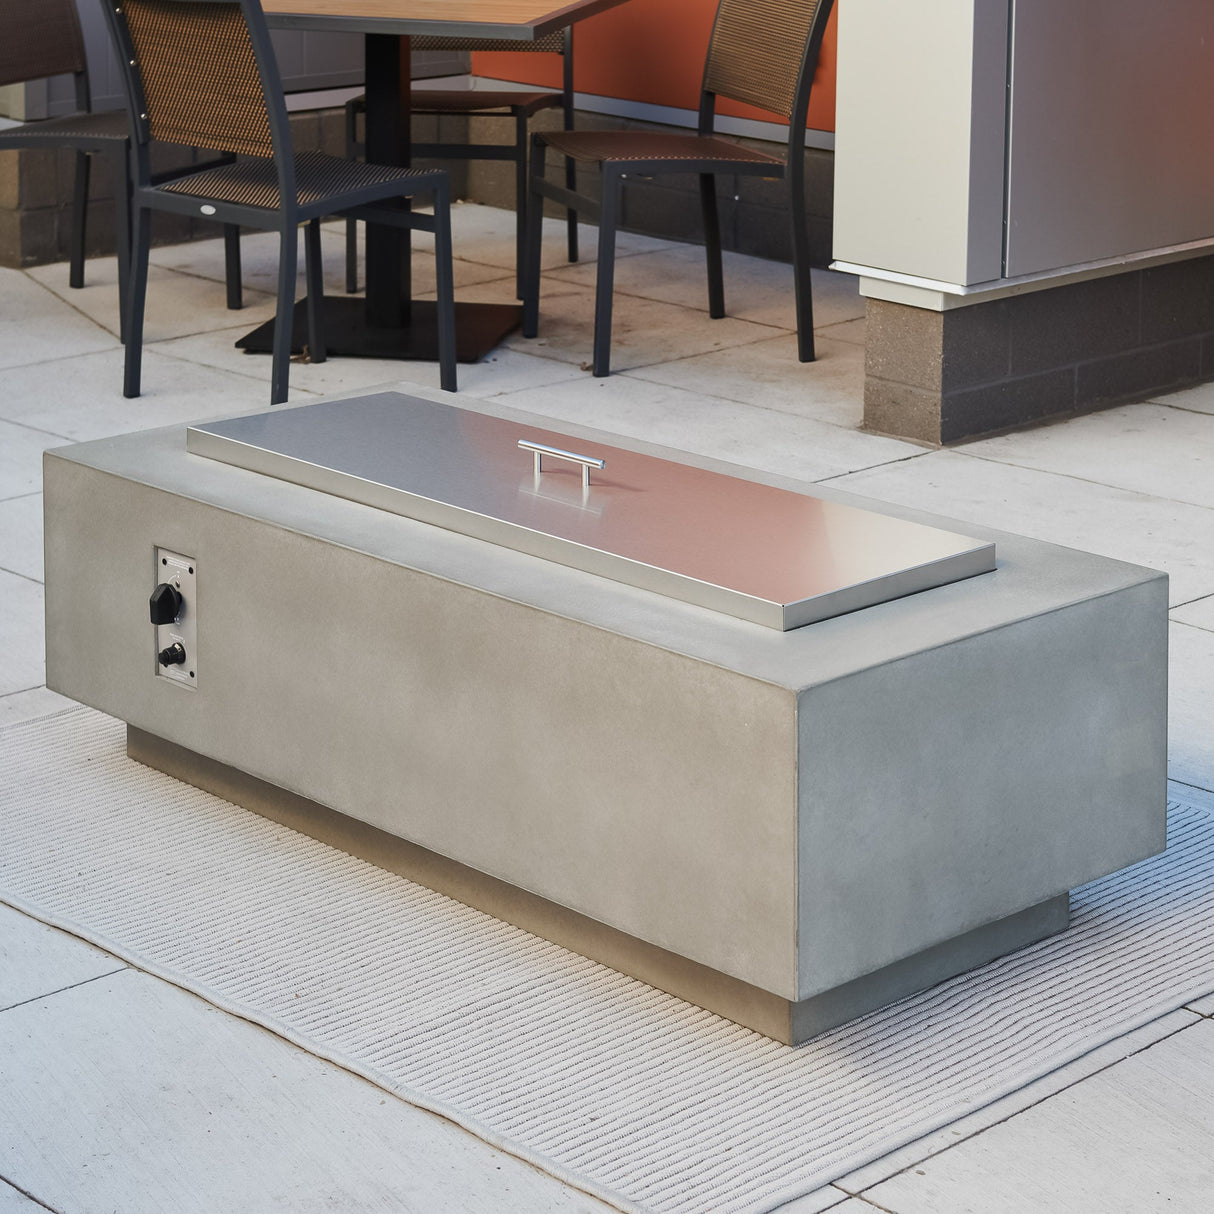 A Stainless Steel Burner Cover placed on top of the Natural Grey Cove Linear Gas Fire Pit Table 54"